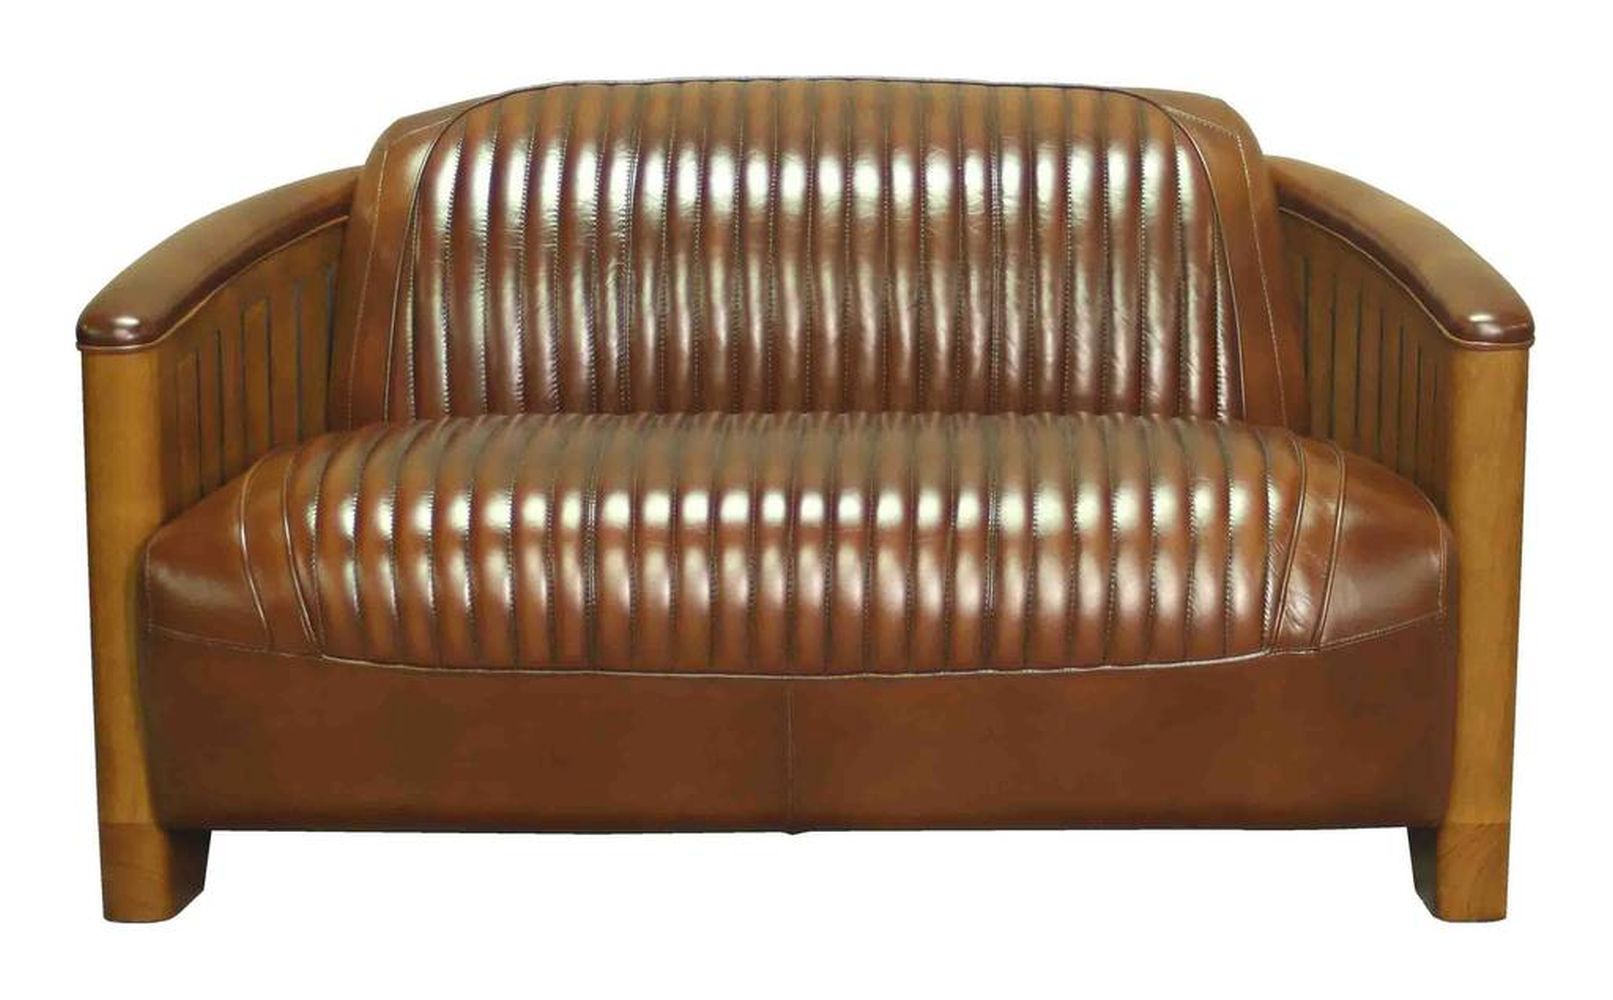 ART DECO STYLE MAHOGANY & HIDE UPHOLSTERED SETTEE - Image 2 of 3